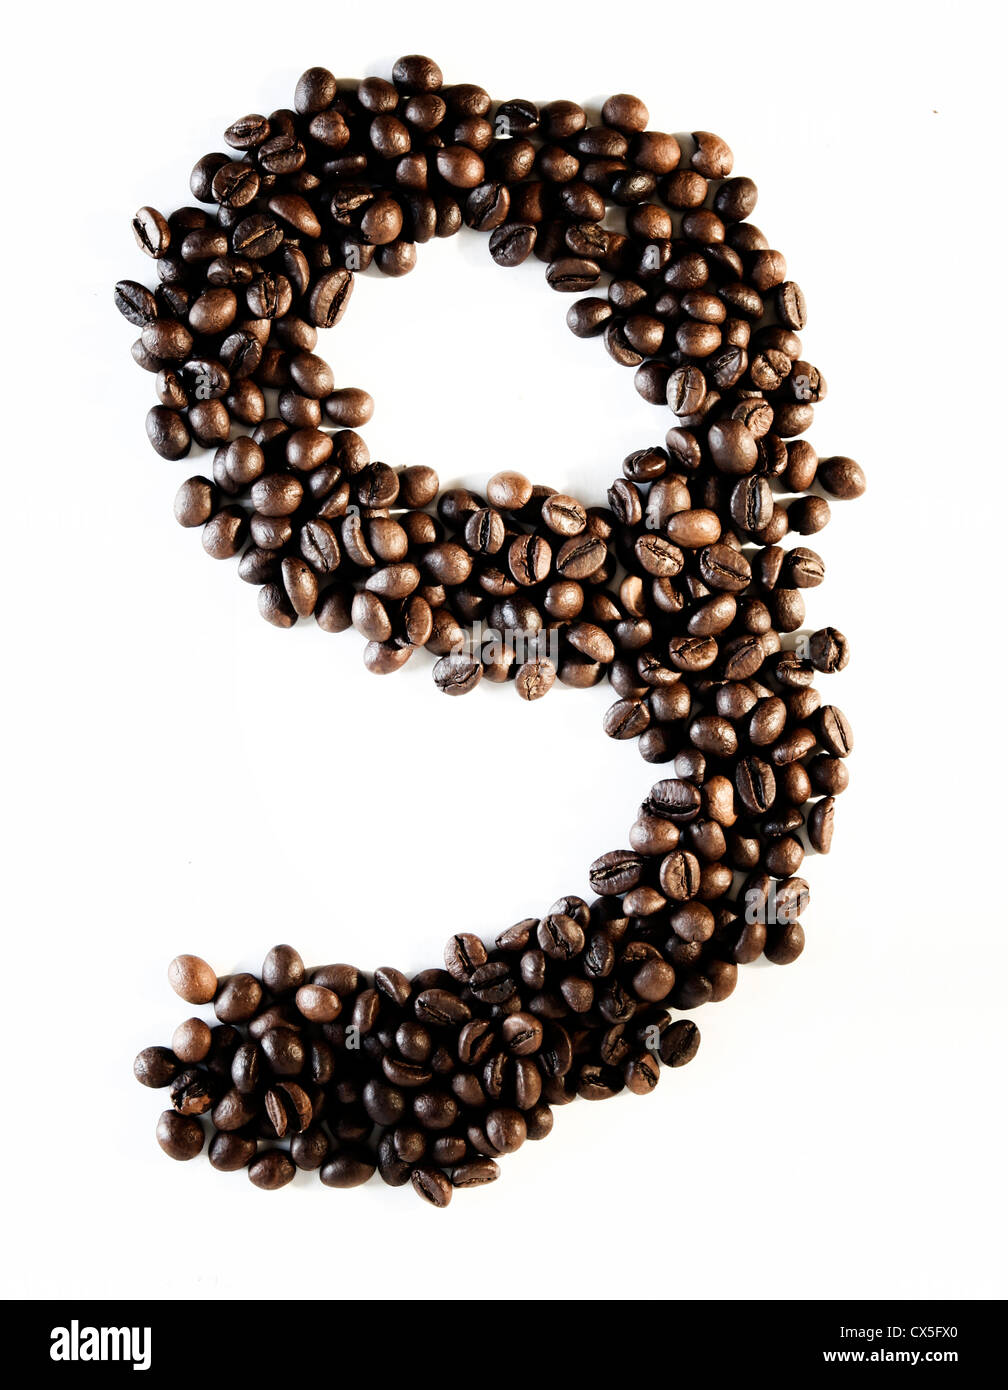 Numbers made from coffee beans Stock Photo